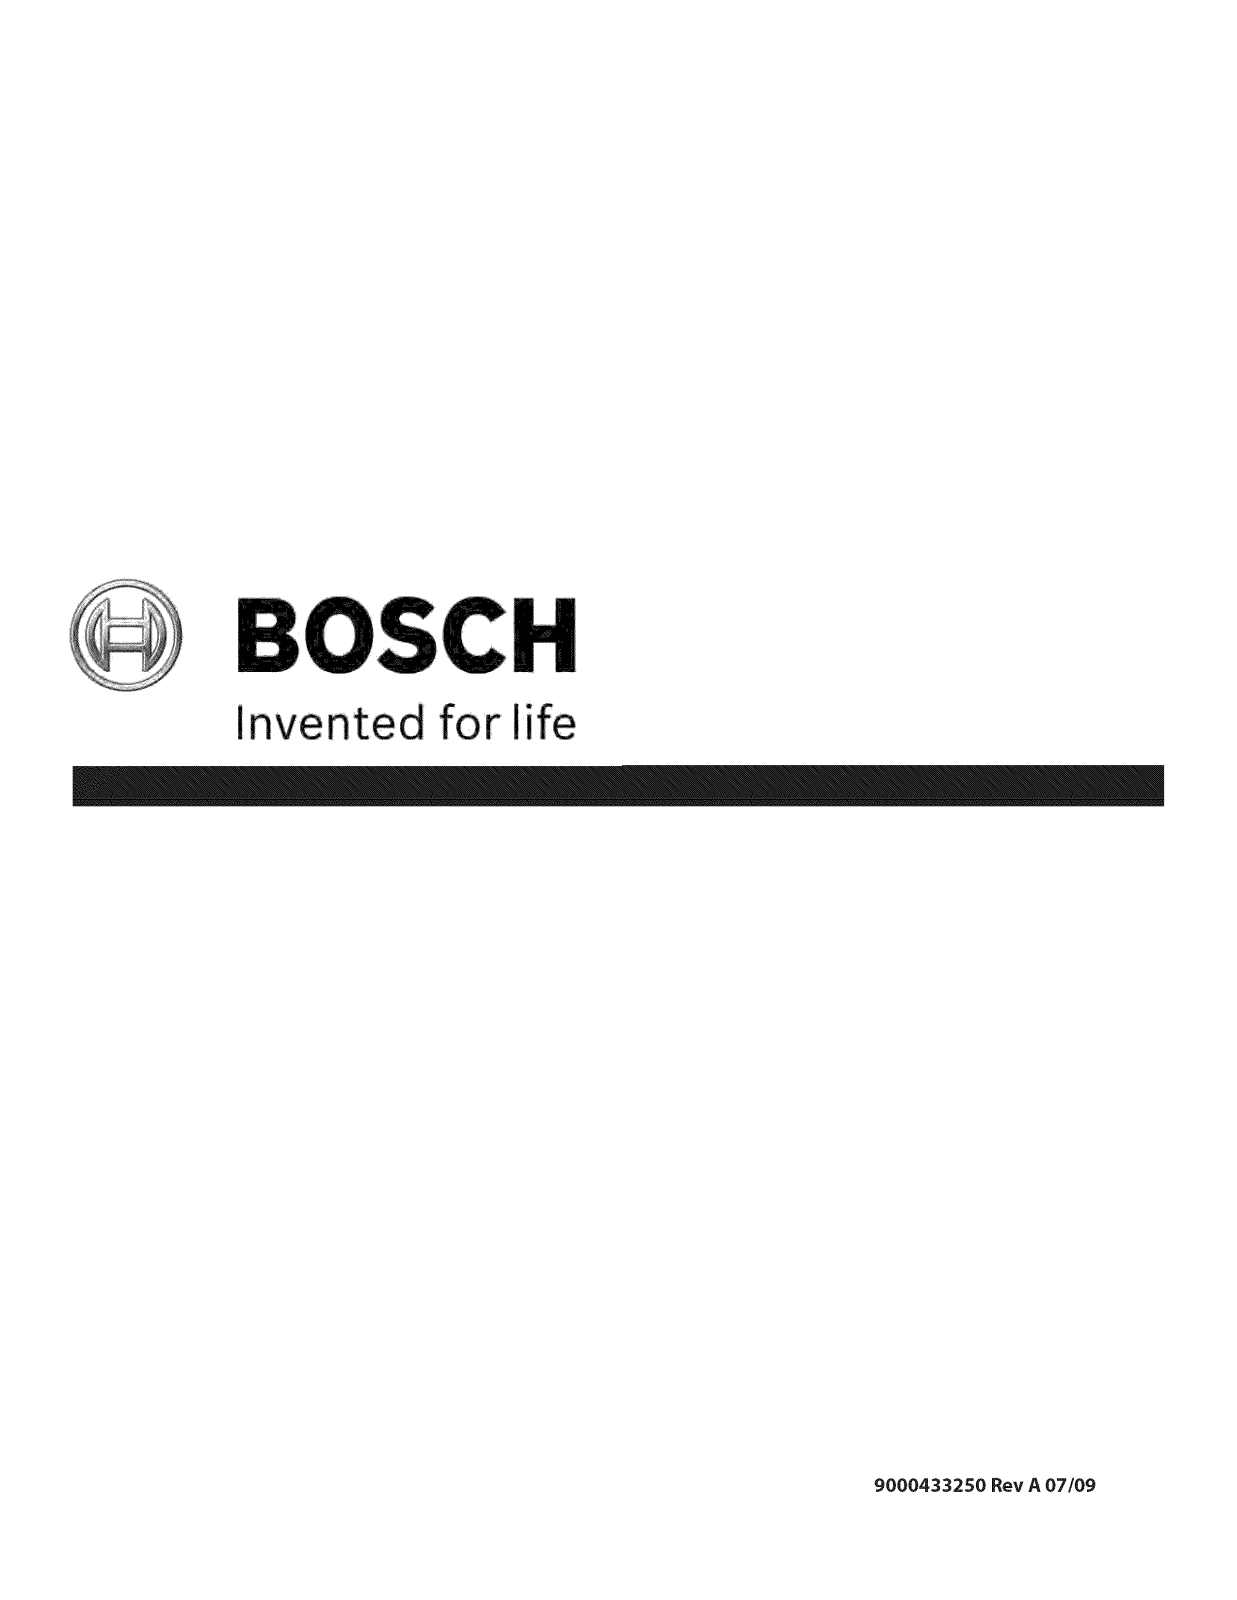 Bosch SHX43P16UC/53, SHX45P02UC/53, SHX45P05UC/53, SHE43P02UC/56, SHE43P05UC/56 Owner’s Manual